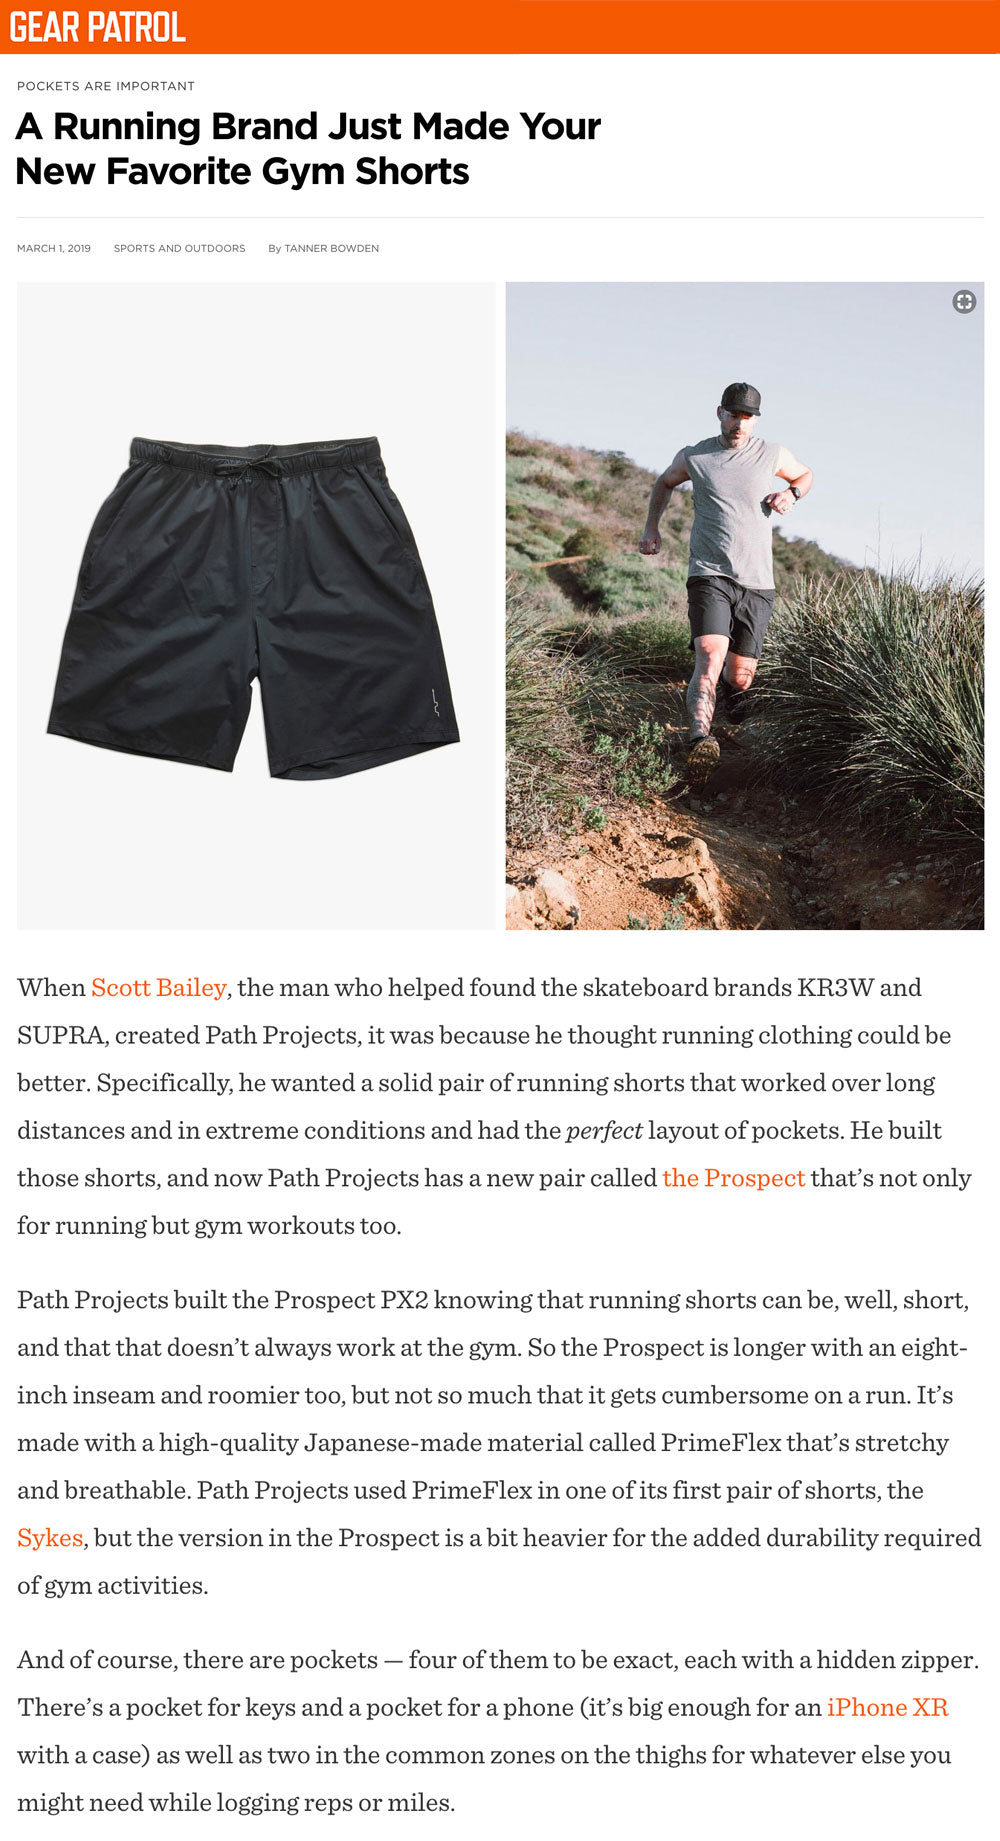 PATH projects Prospect Shorts featured on Gear Patrol